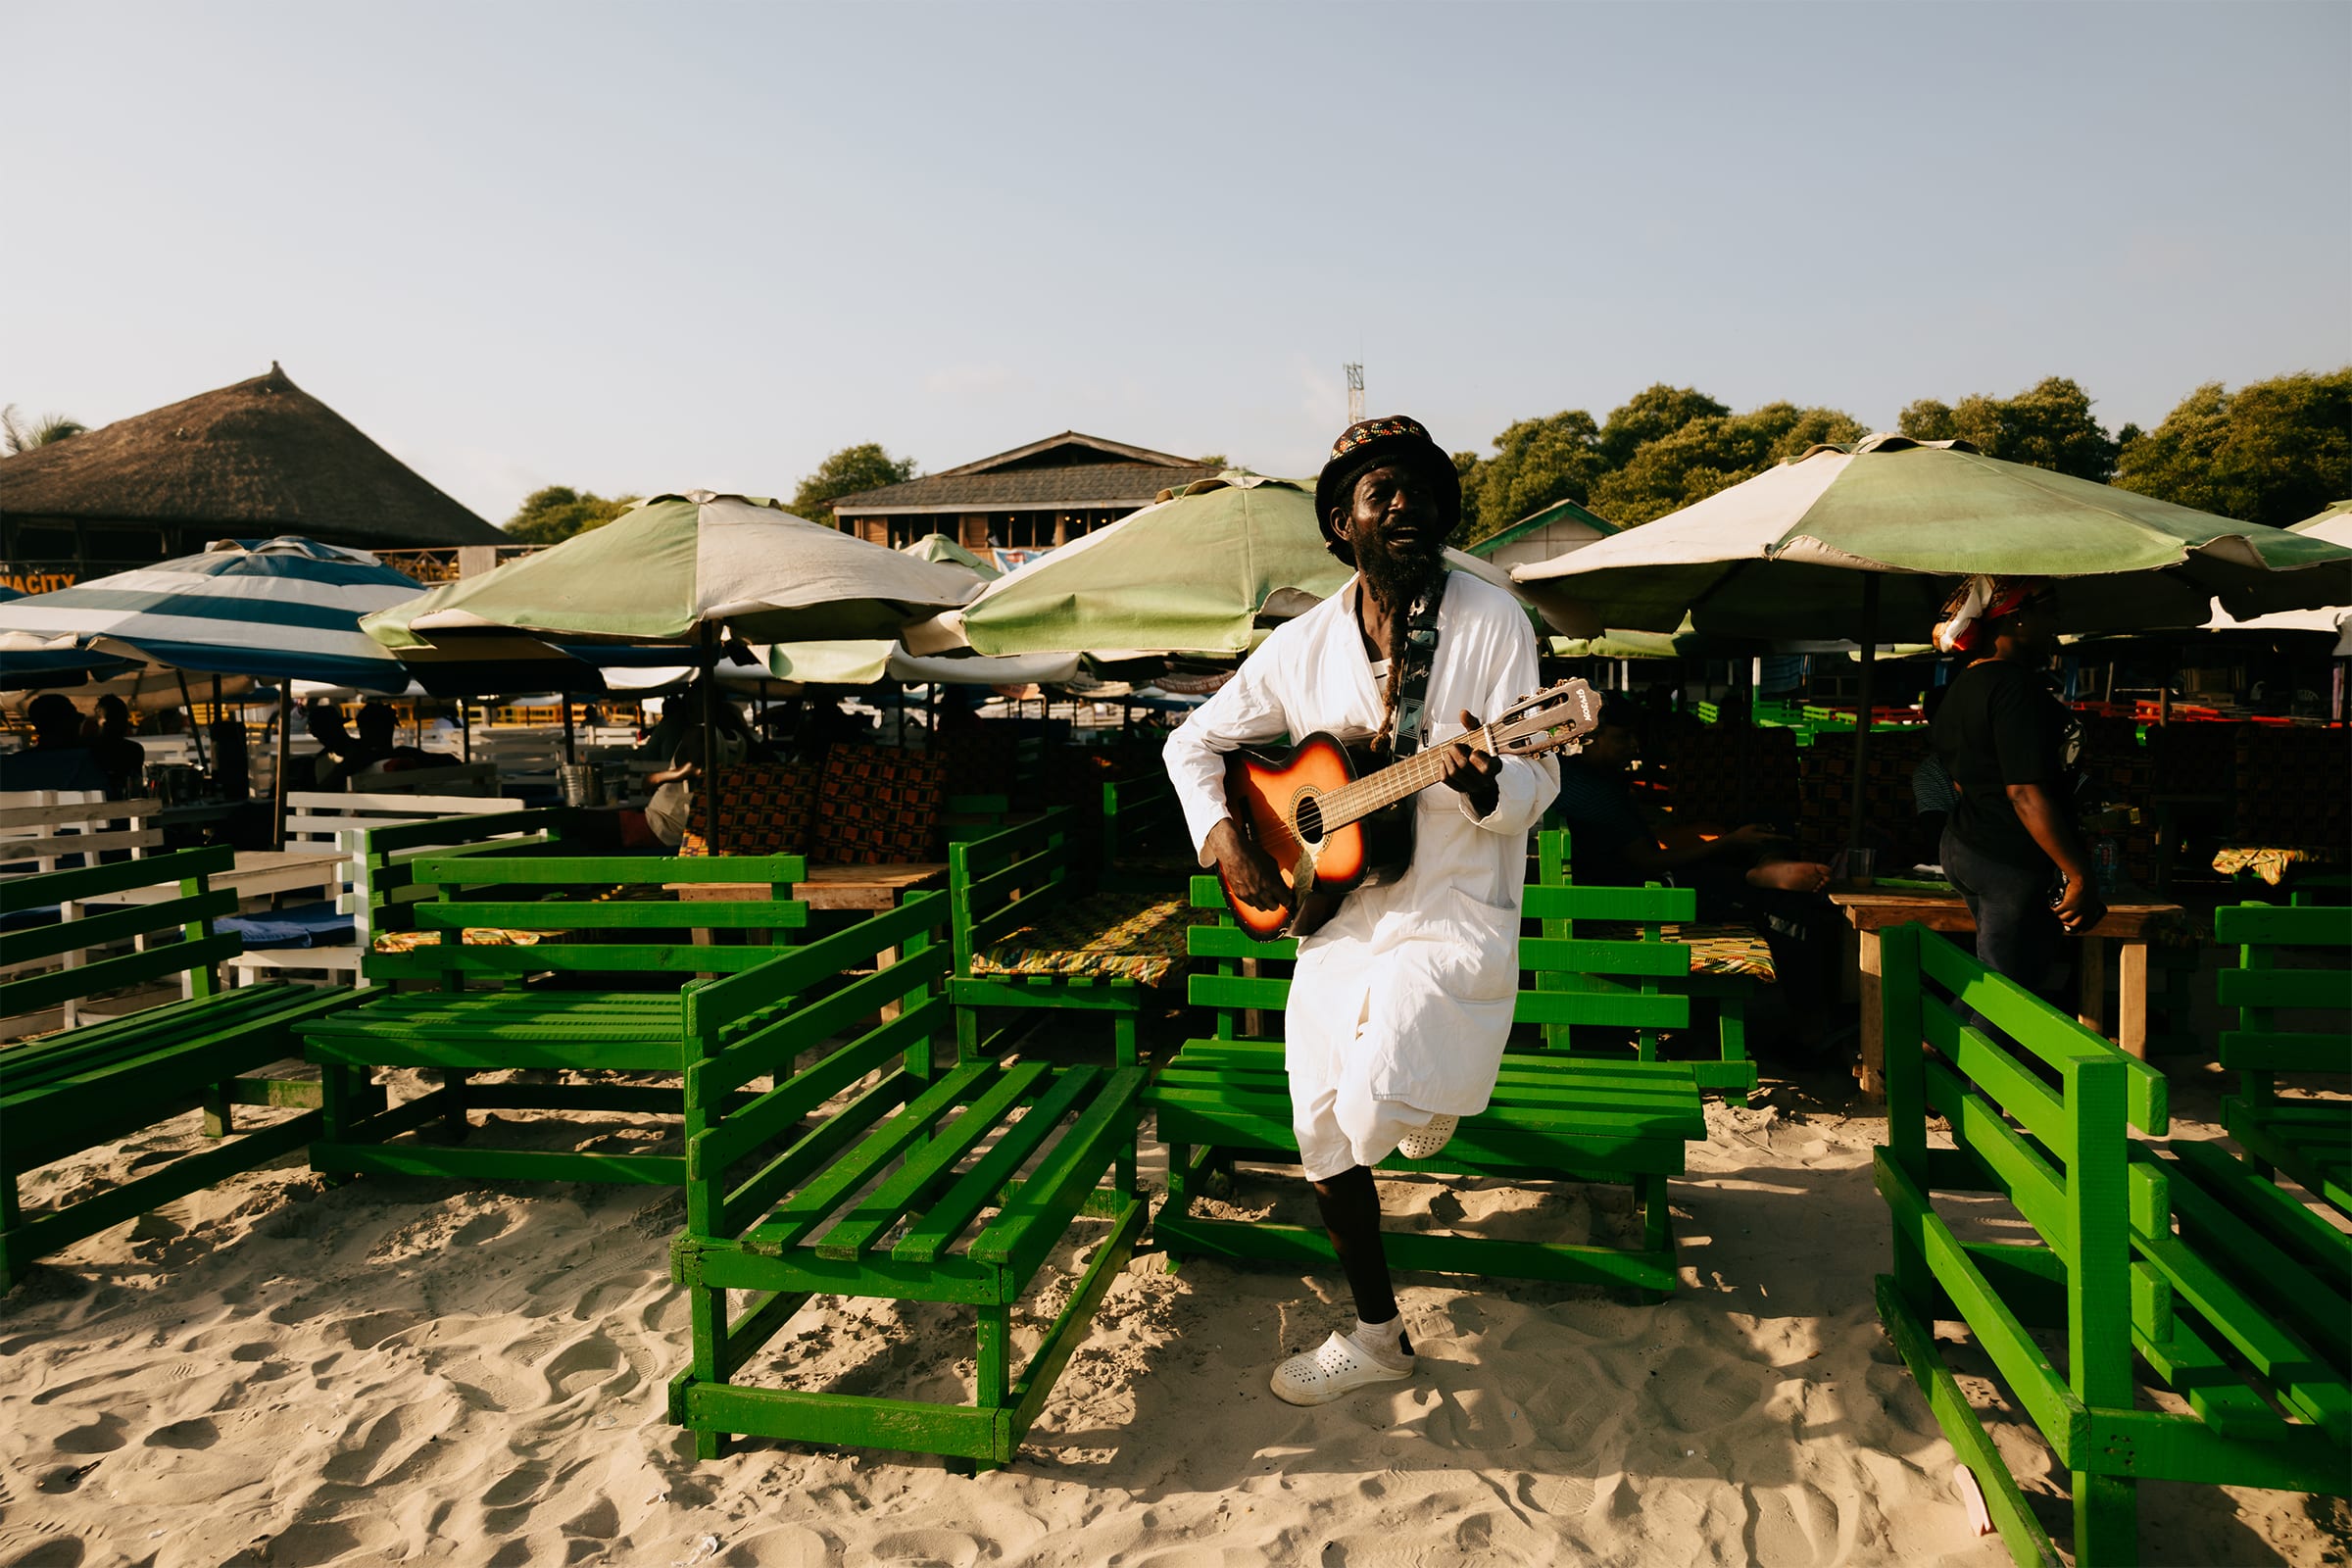 A musician on the beach in Accra. Photography by Rachel Seidu for Art Basel.